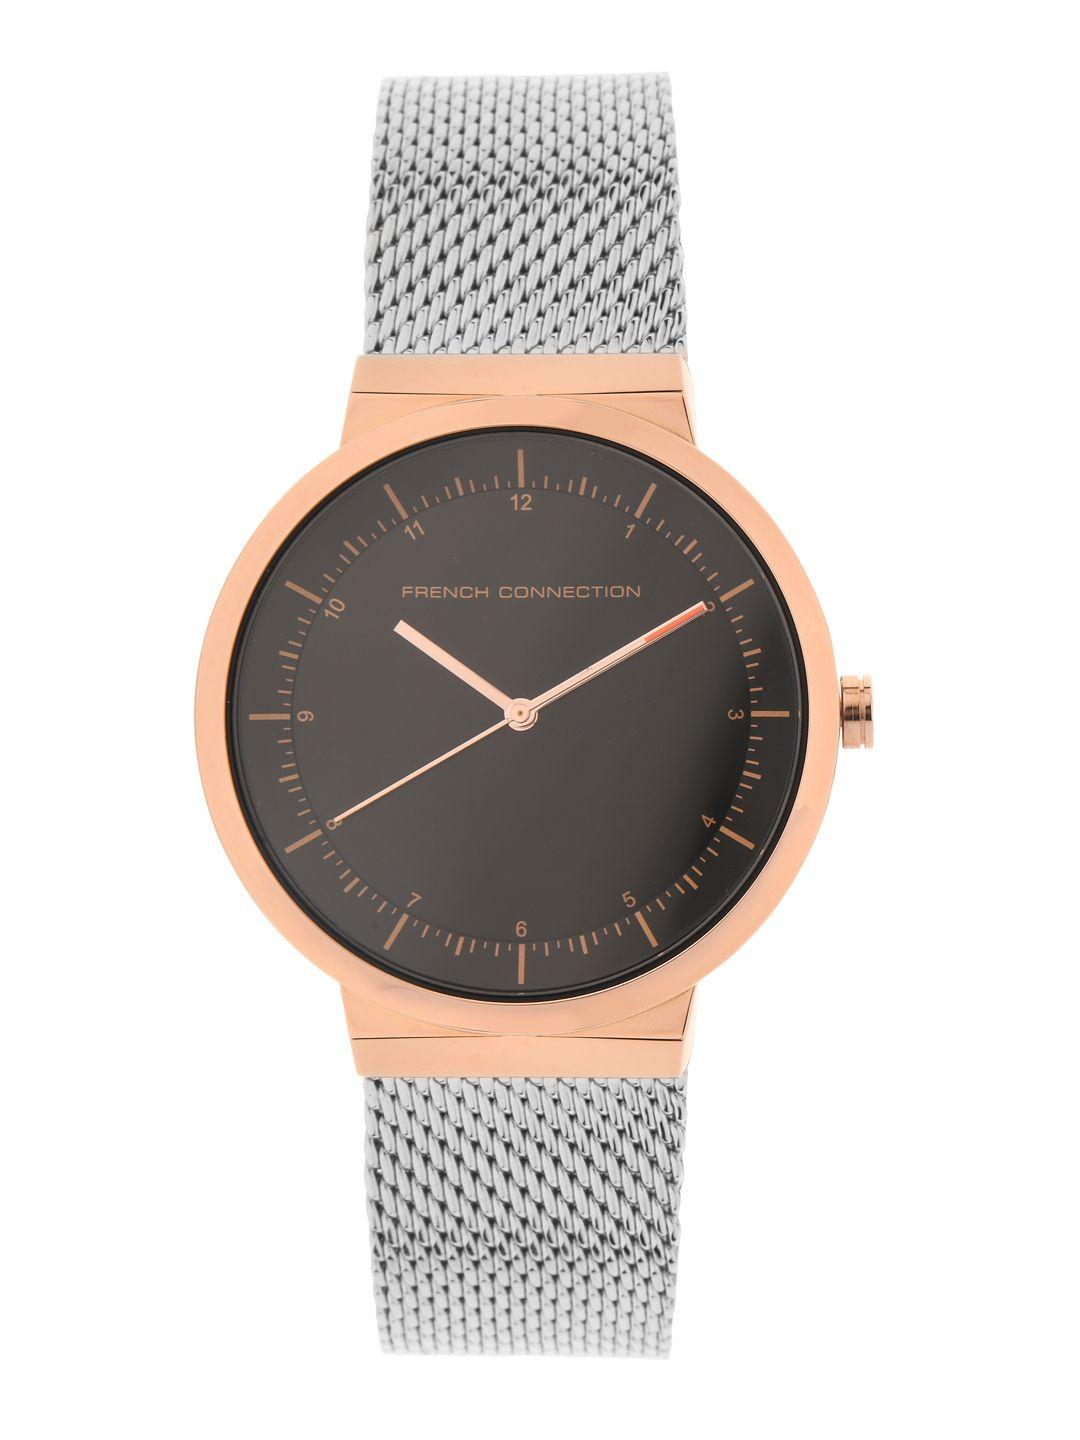 french-connection-men-black-&-rose-gold-analogue-watch